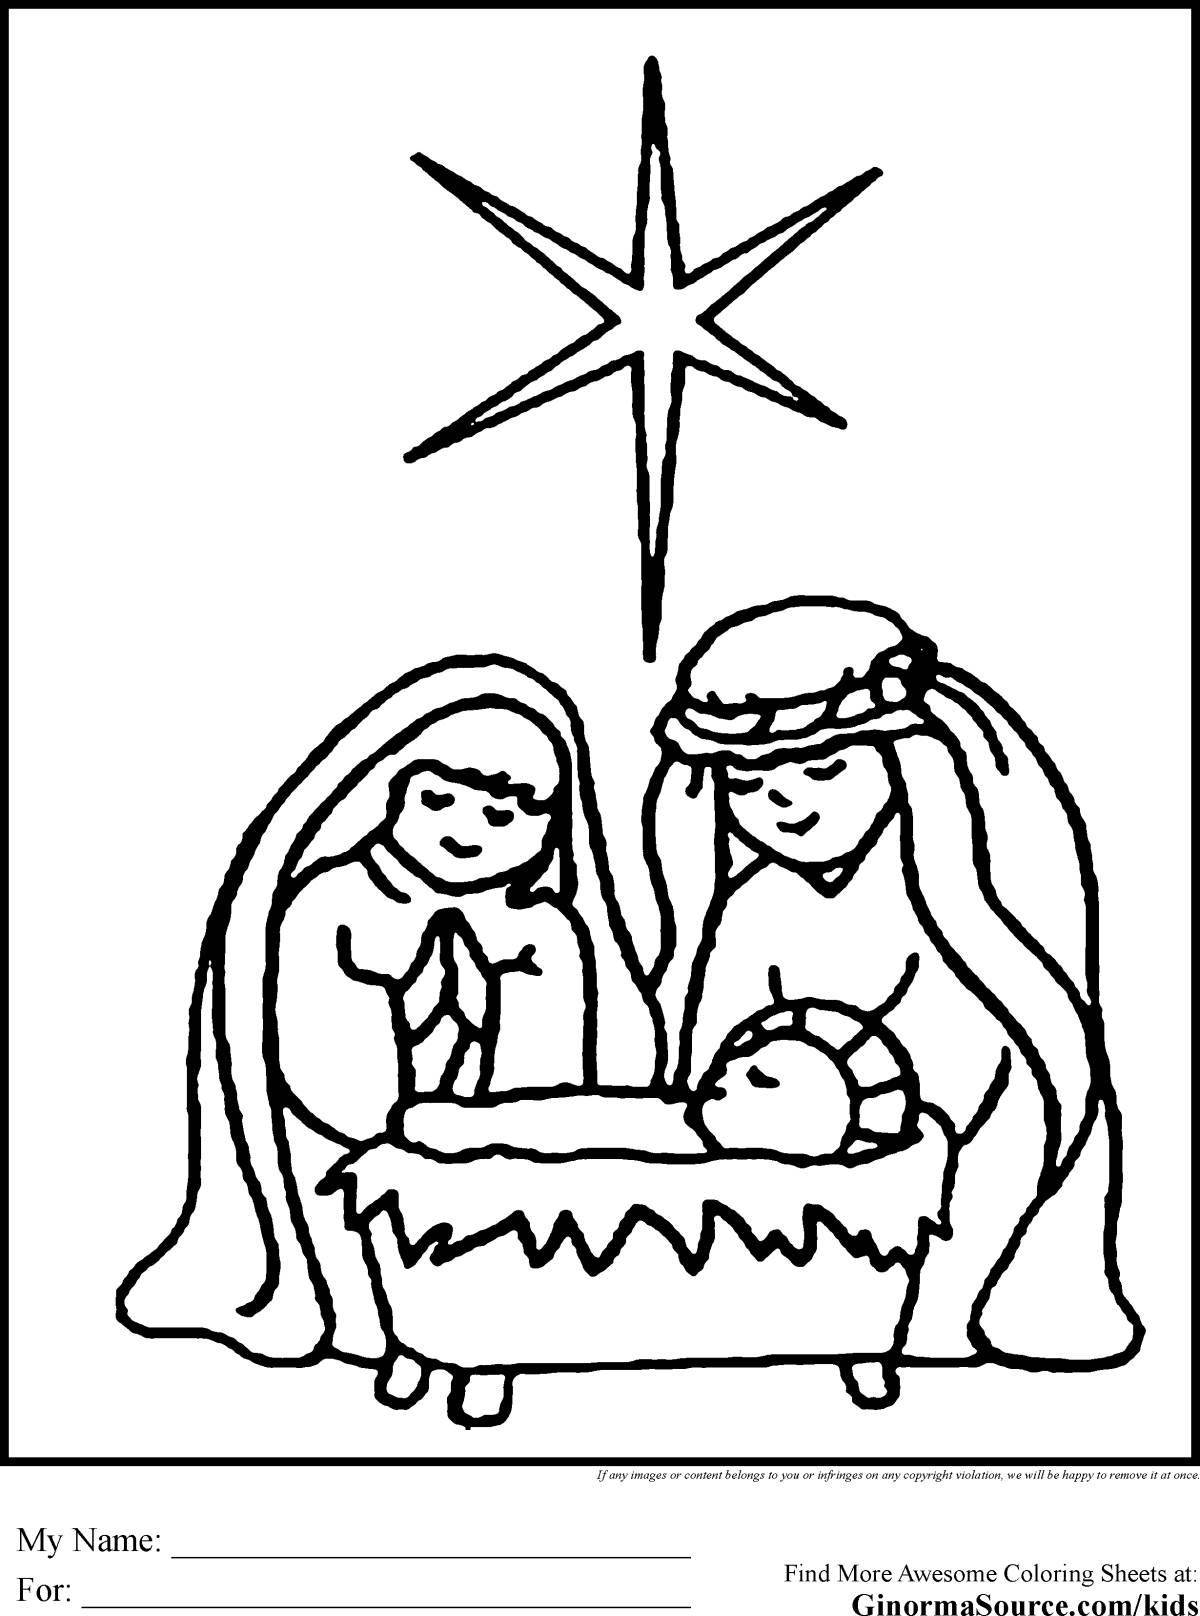 Jolly Star of Bethlehem coloring pages for kids